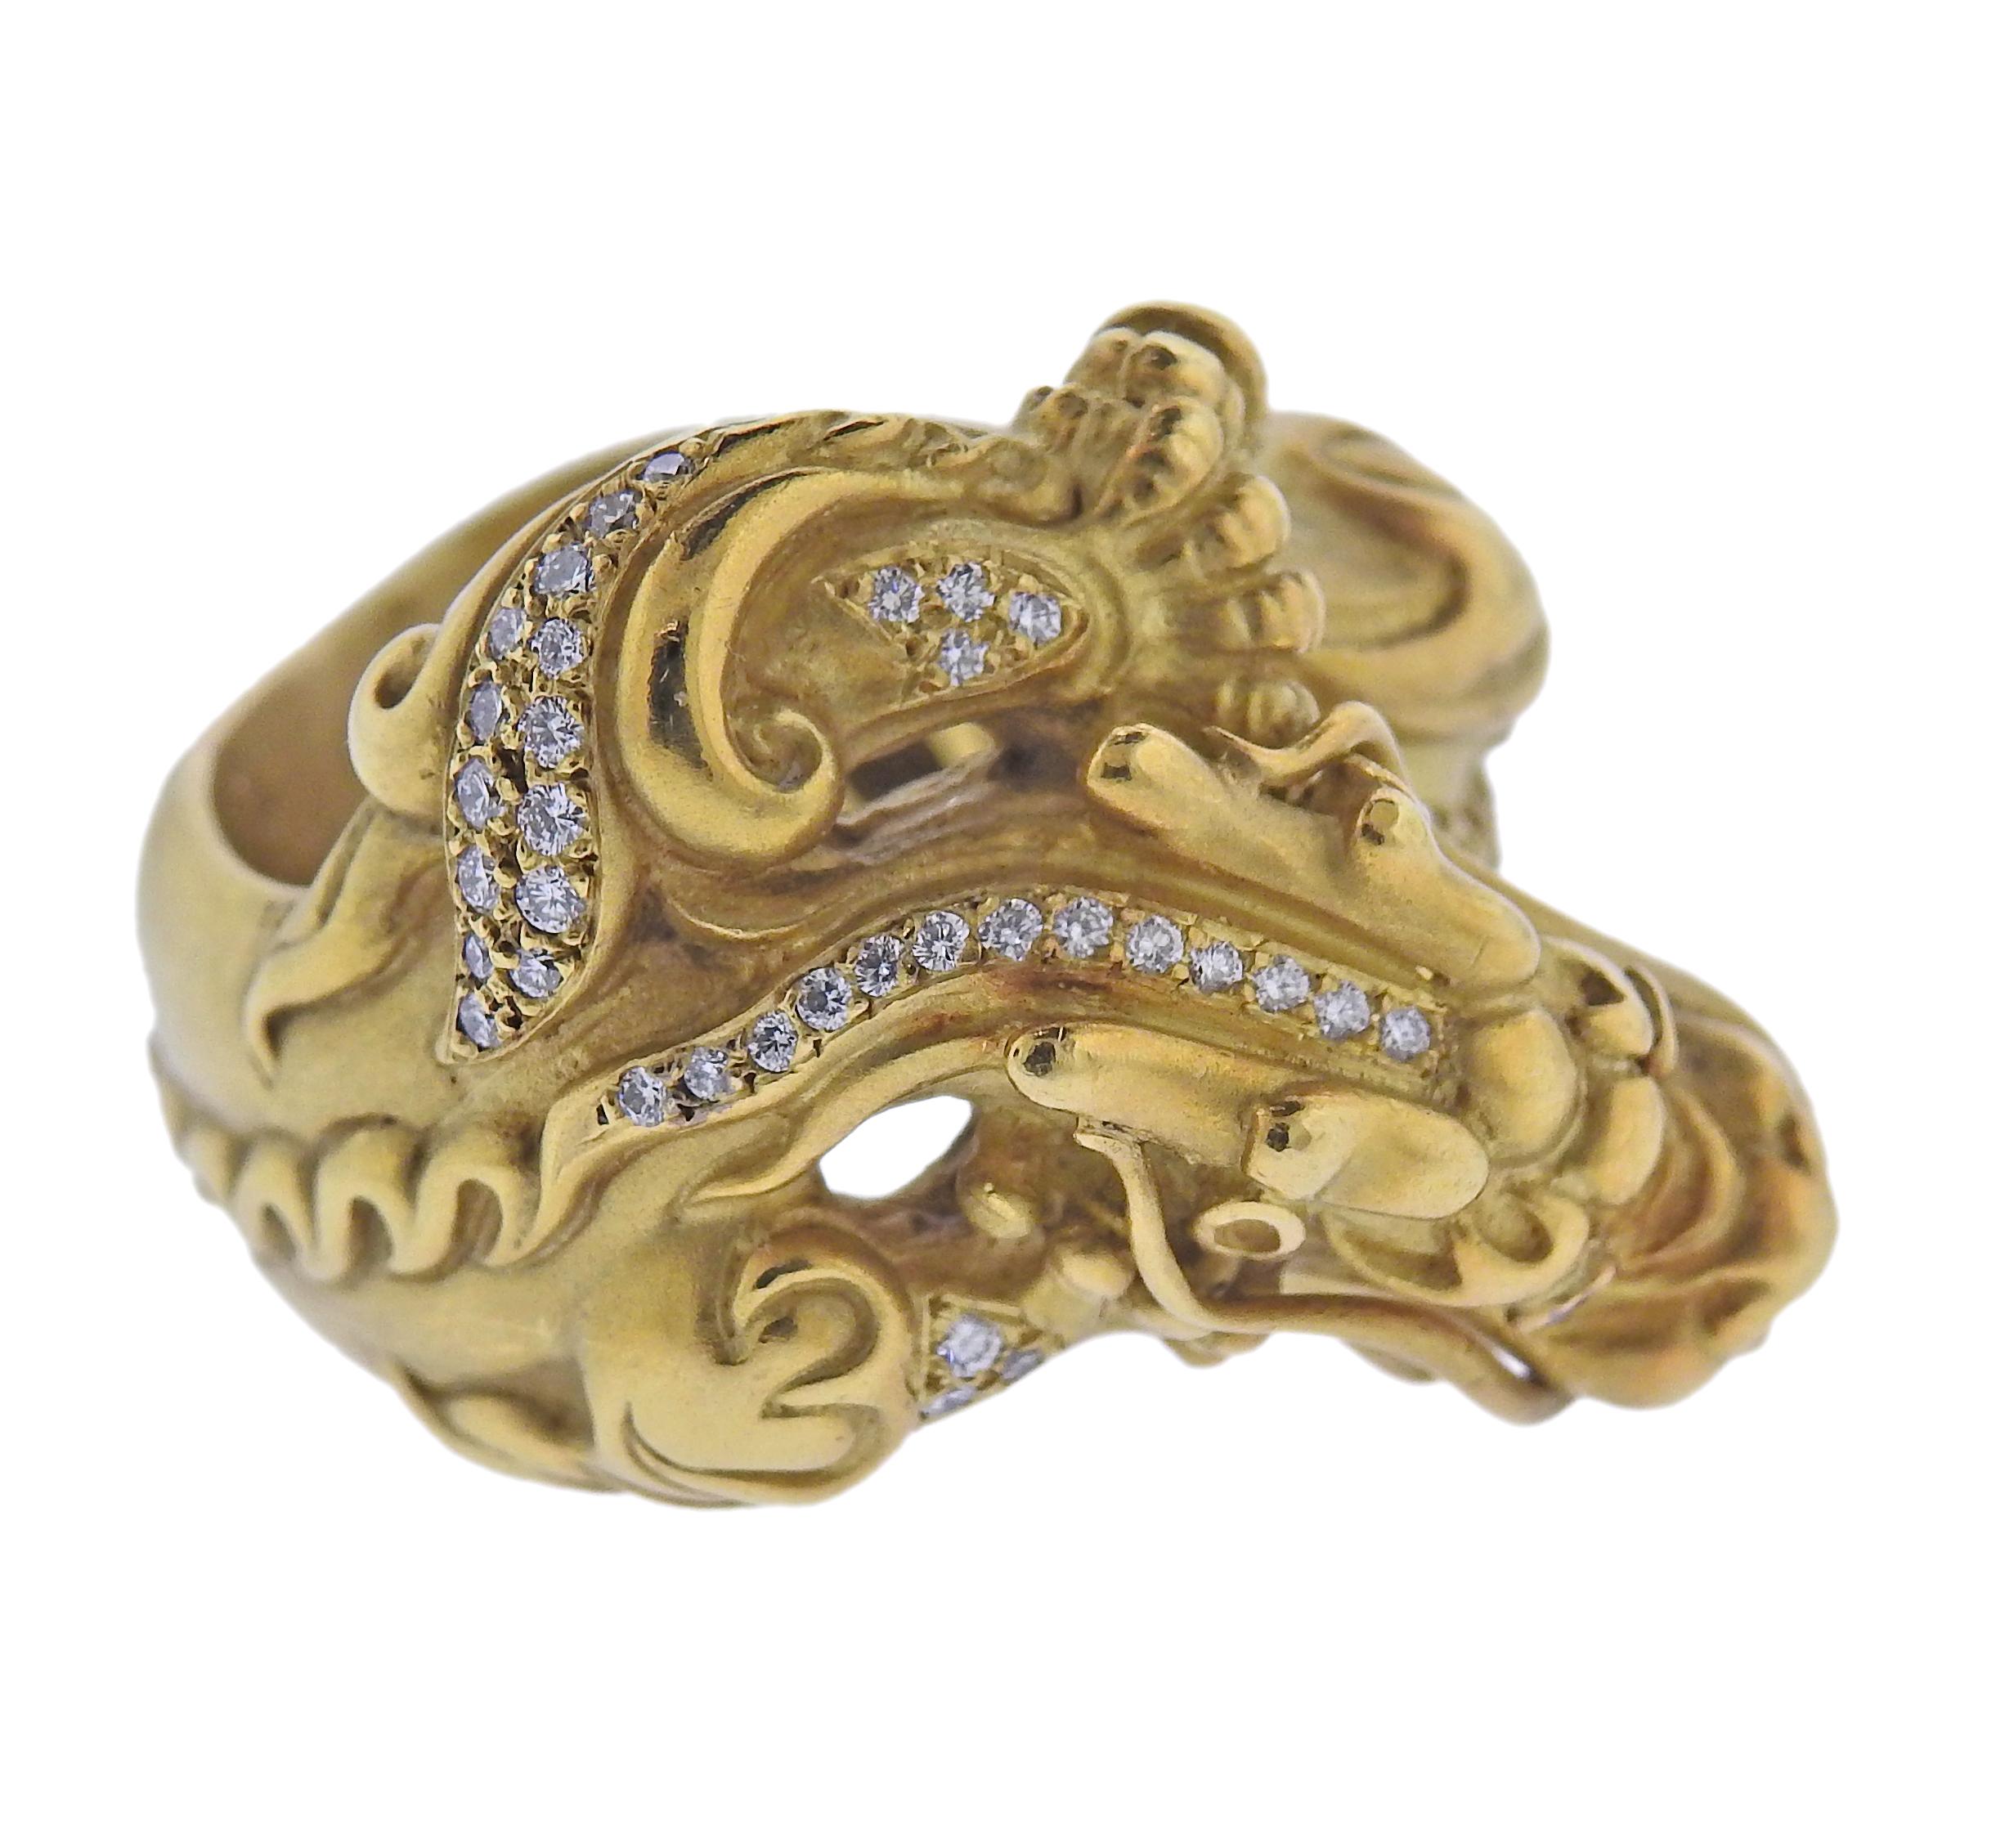 Rare 18k gold dragon ring by Barry Kieselstein-Cord, with ruby eyes and approx. 0.30ctw G/VS diamonds. Ring size 9, top of the ring is 25mm wide.  Weight - 34.4 grams. Marked: B. Kieselstein-Cord, 1998, 18k, 750, Maker's mark.